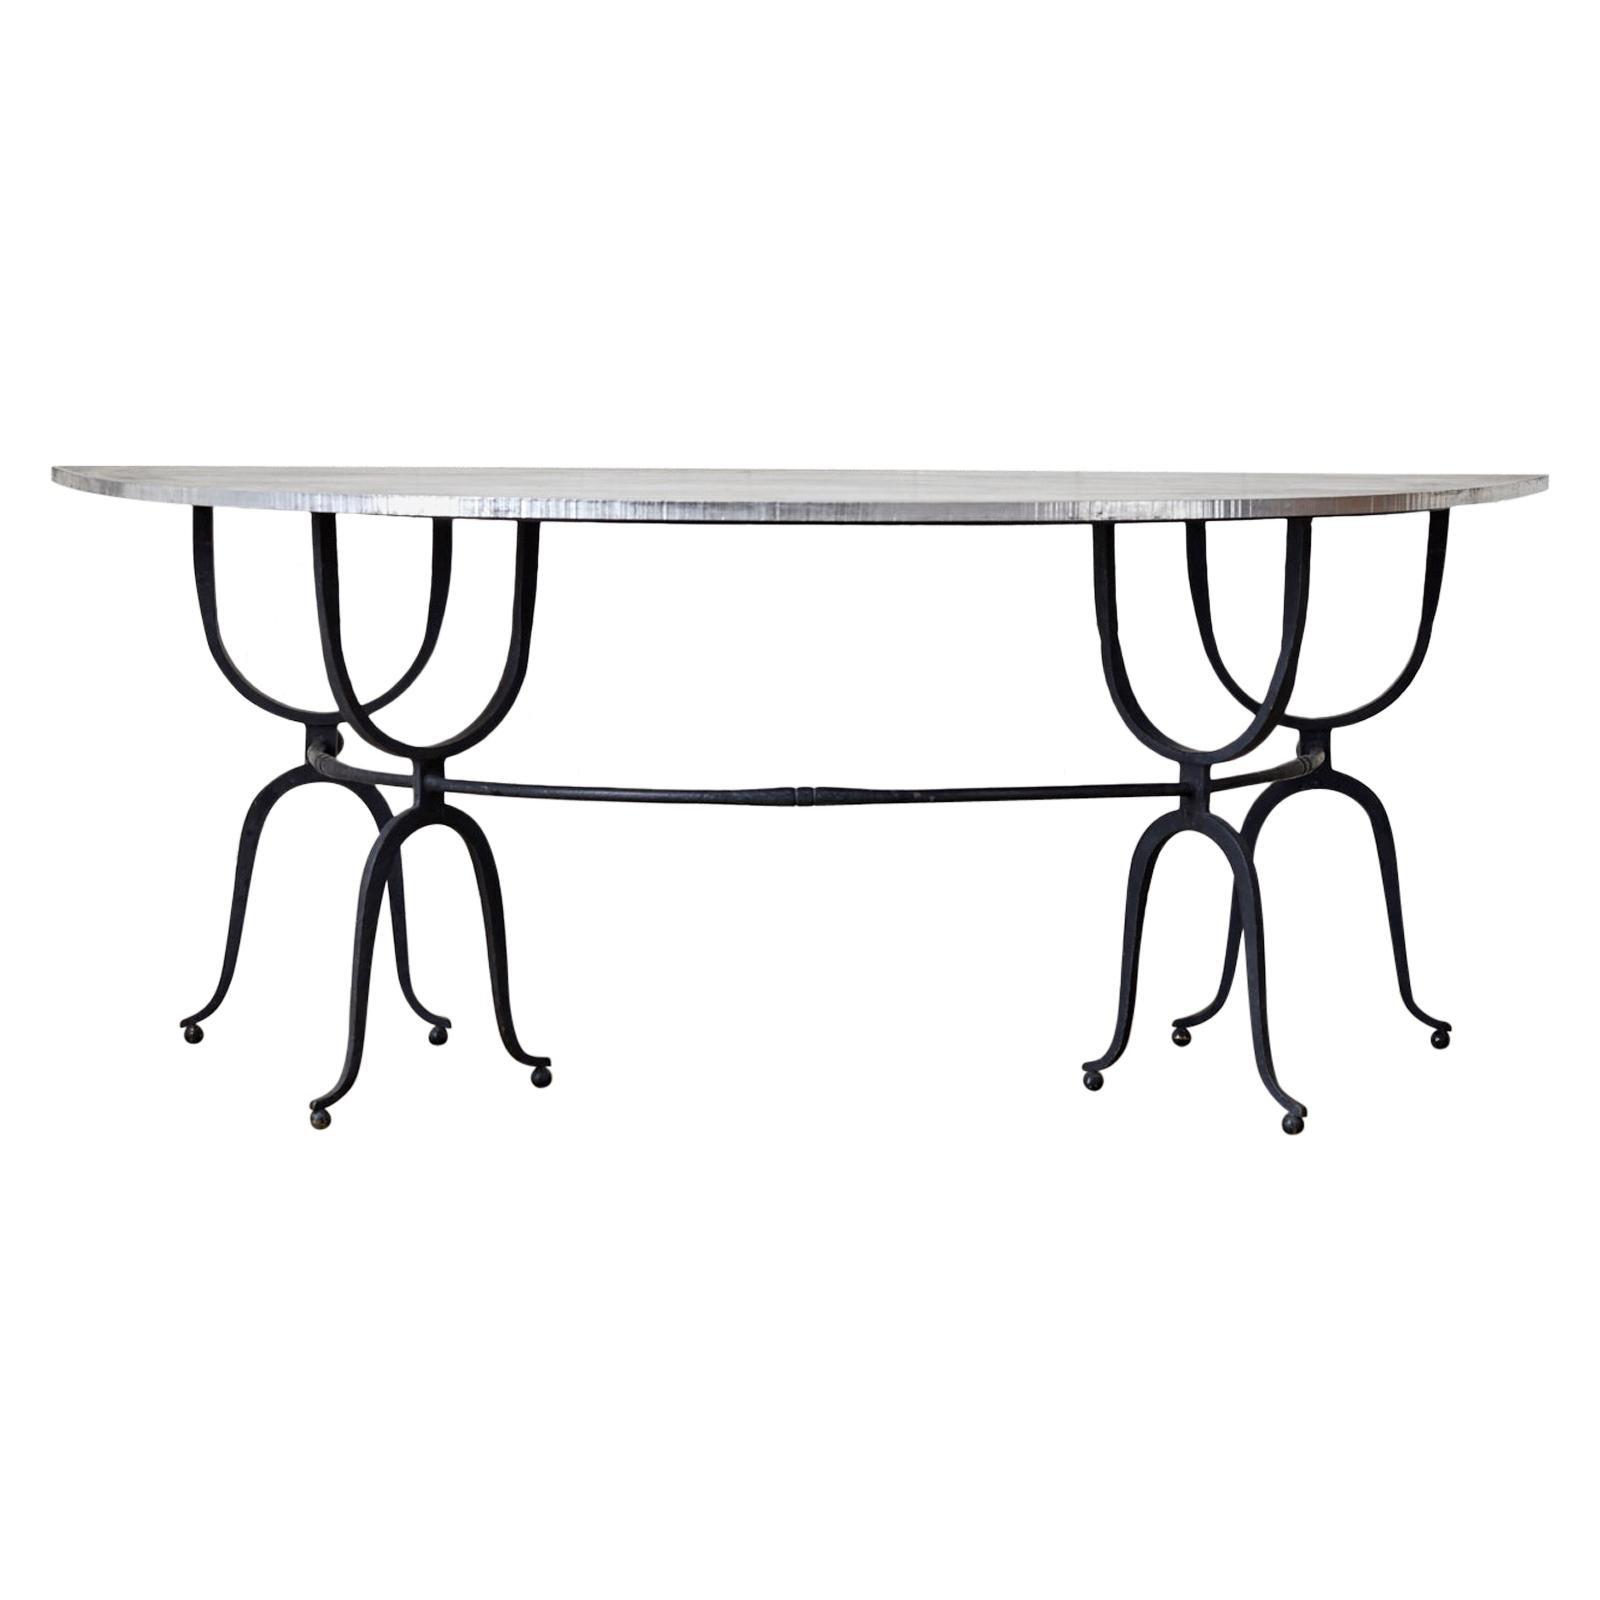 Italian Iron Demilune Hunt Table or Wine Tasting Table  For Sale